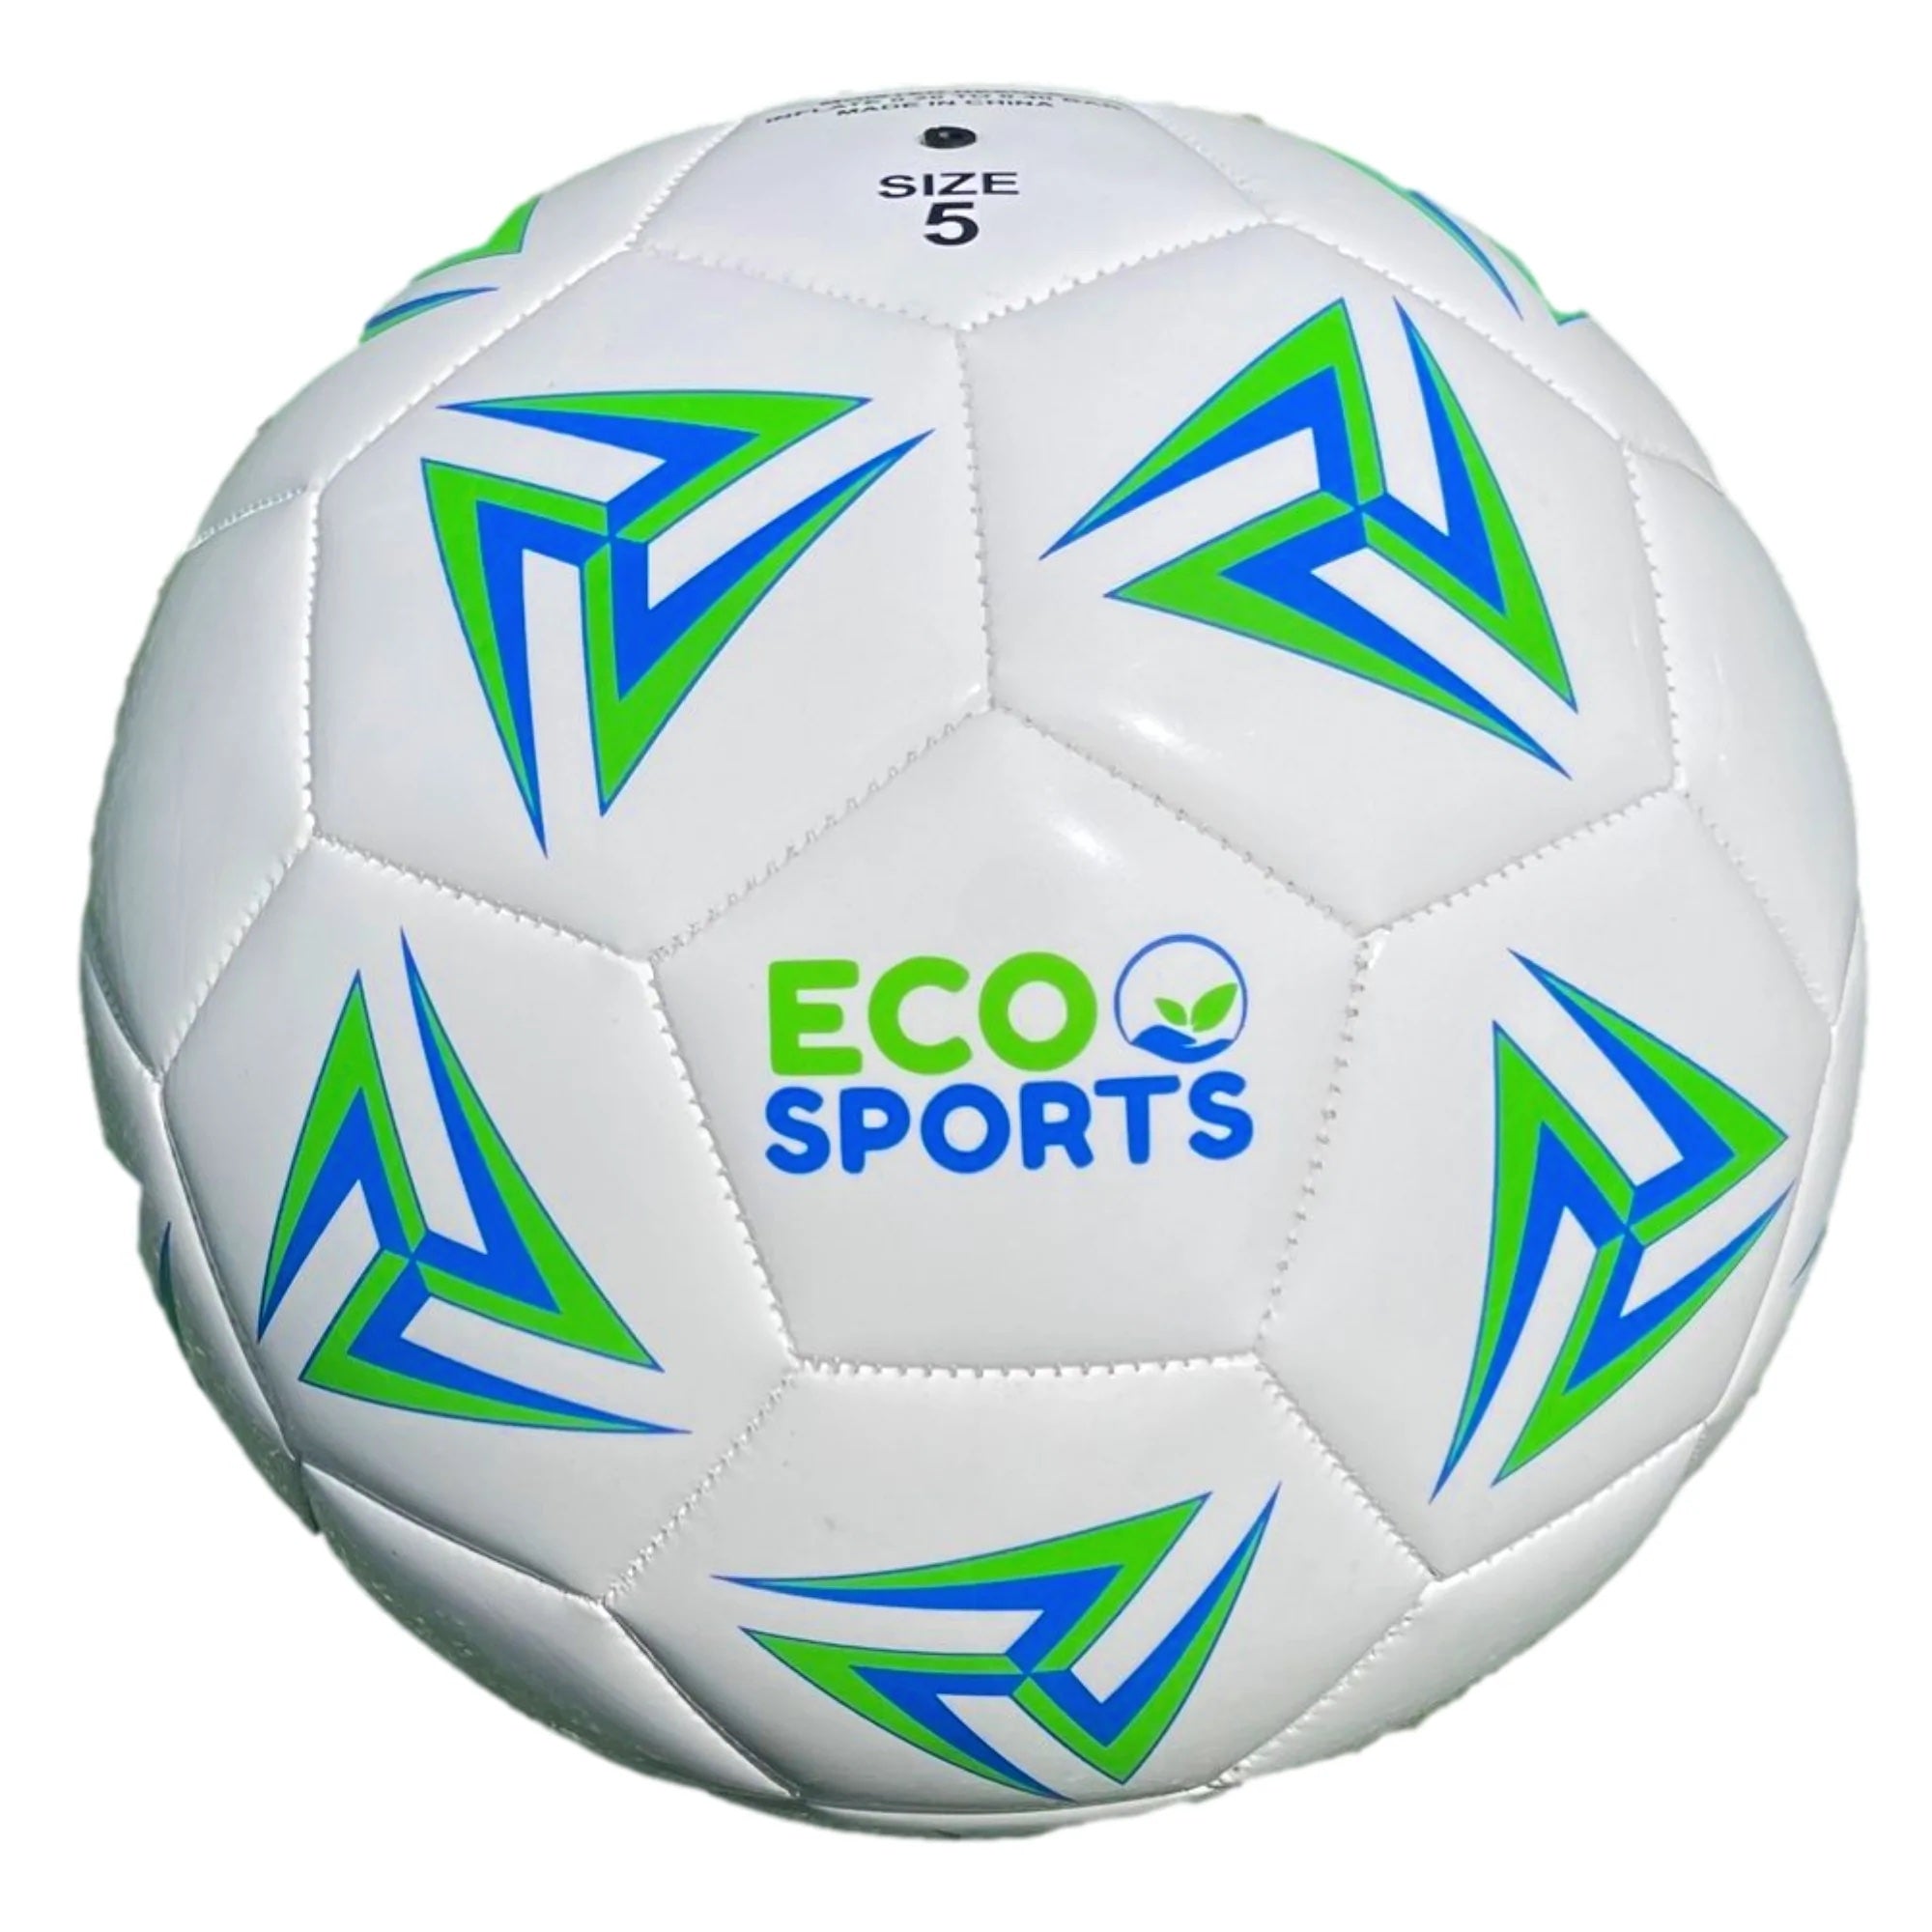 Size 4 - Ages 8-12 Eco Friendly Soccer Balls For Boys & Girls